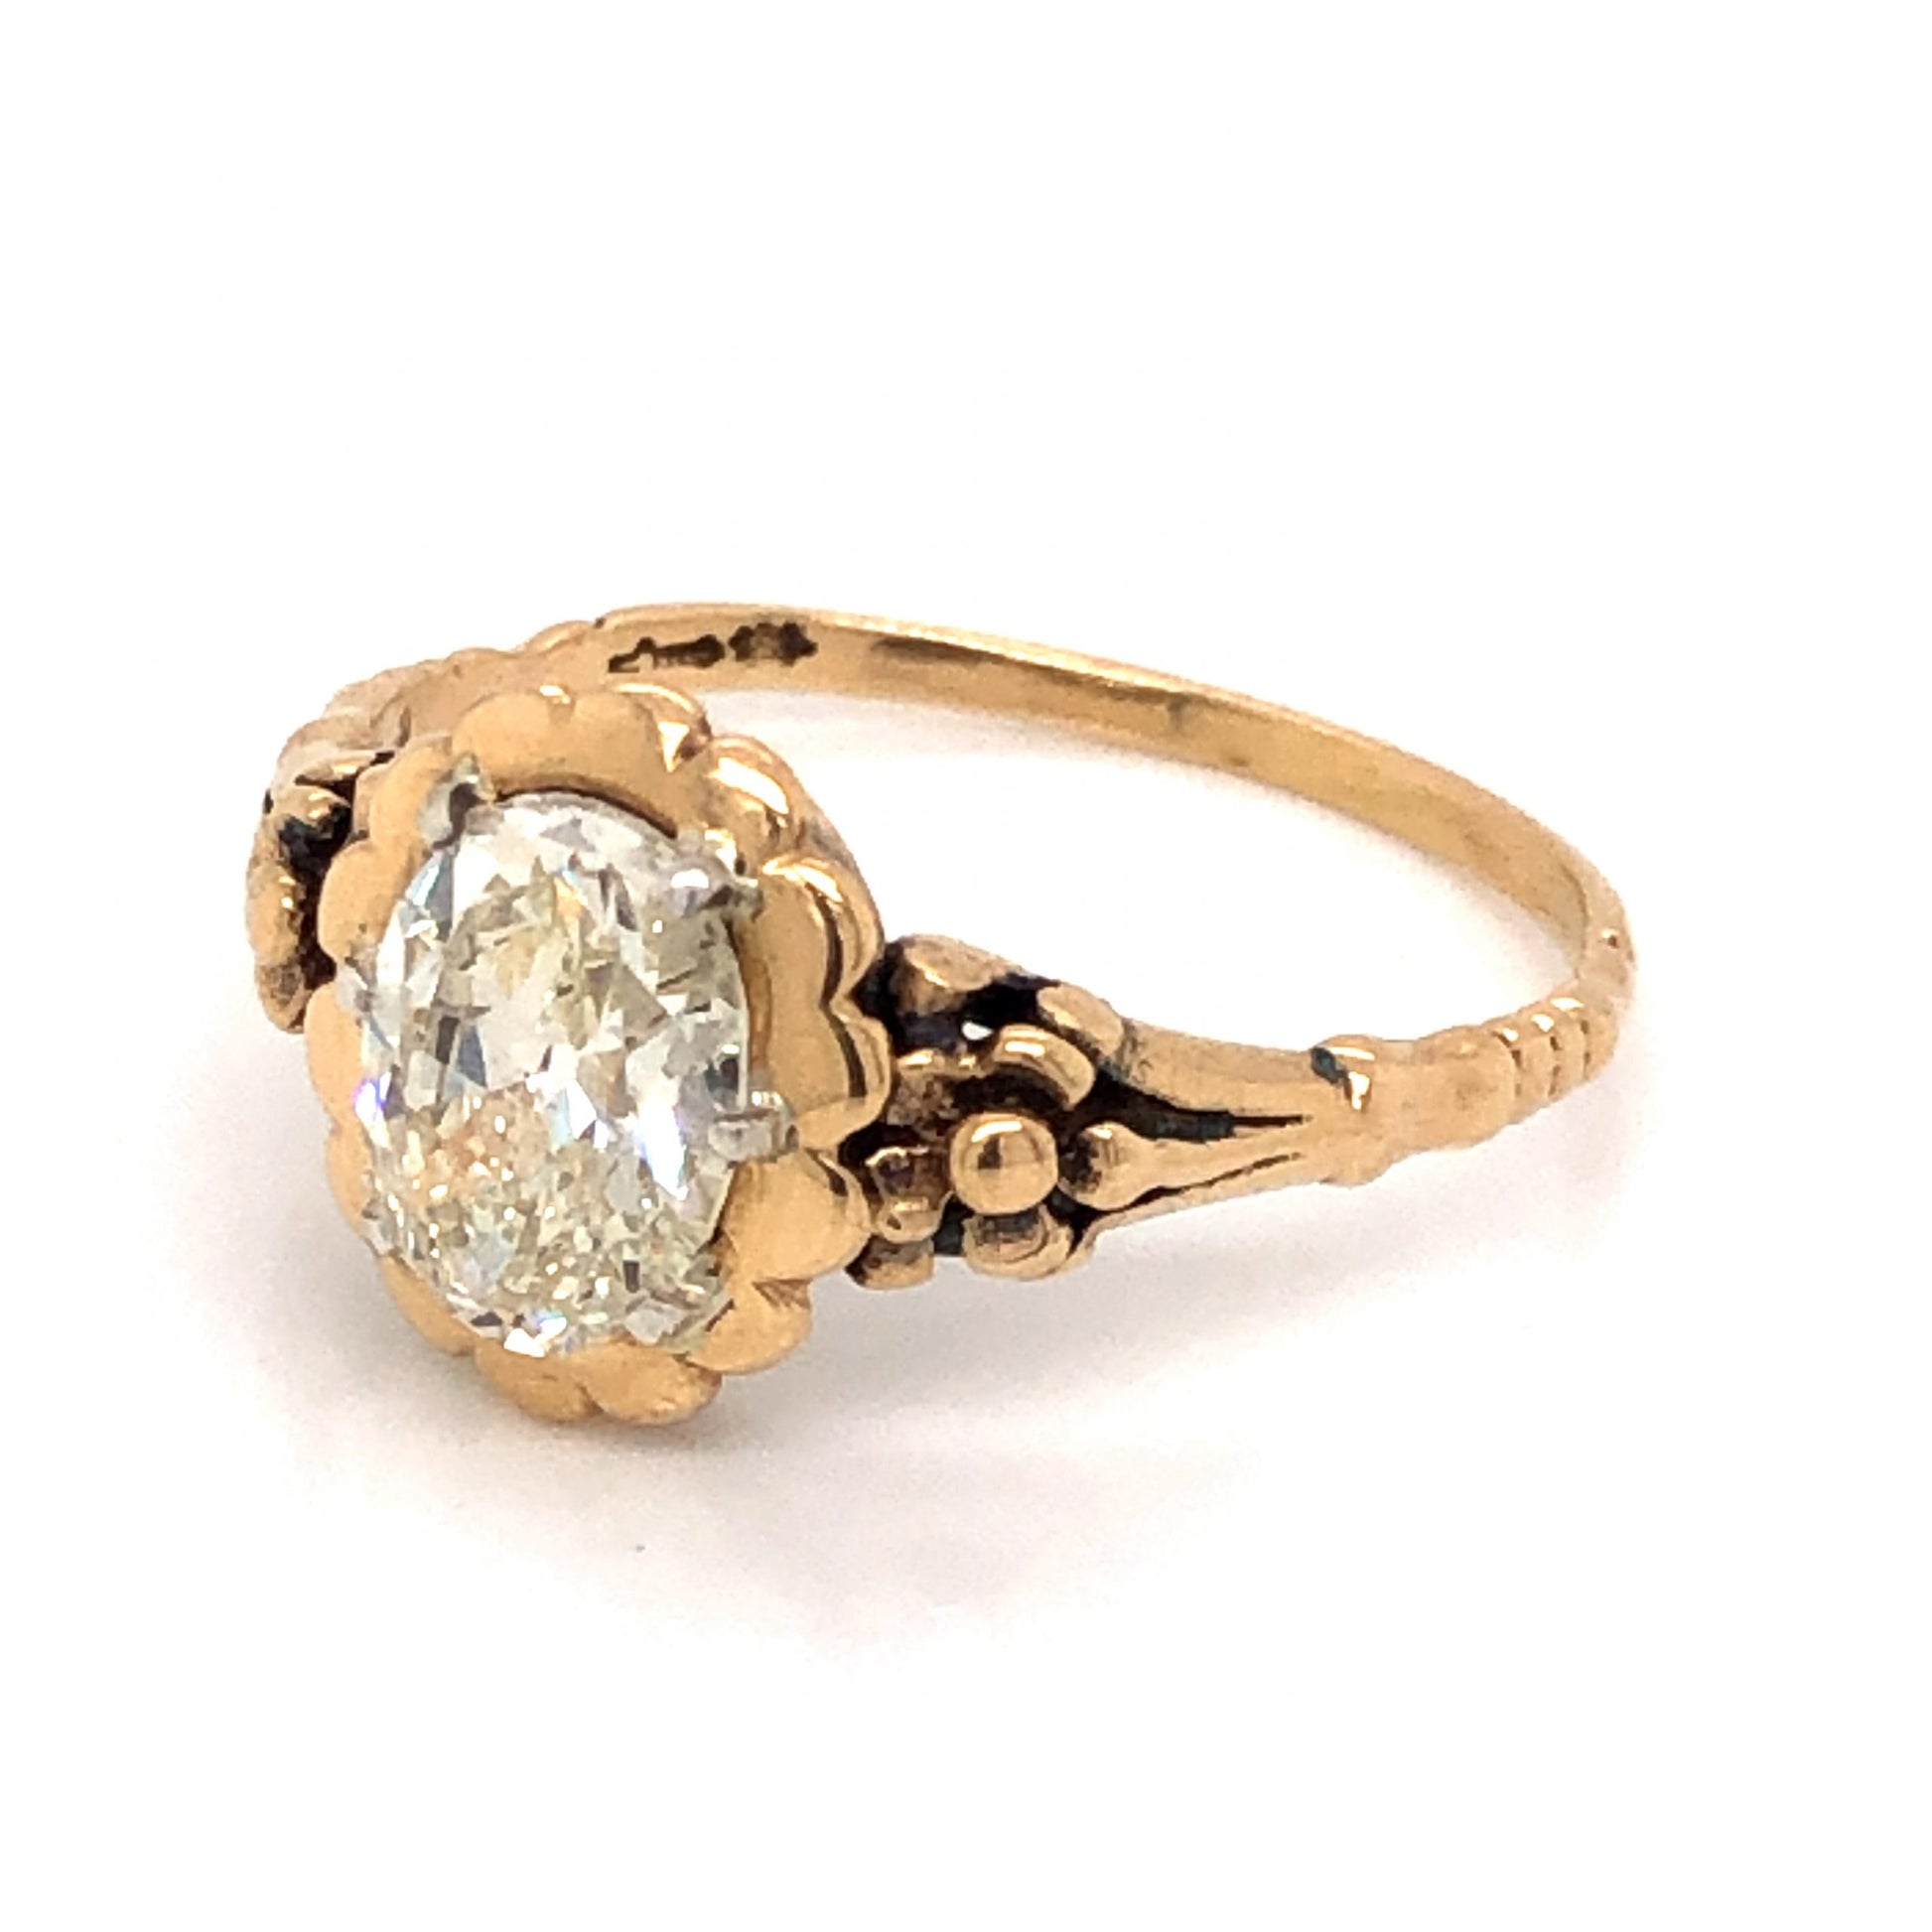 1.08 Victorian Oval Cut Diamond Engagement Ring in 14k Yellow GoldComposition: Platinum Ring Size: 7 Total Diamond Weight: 1.08ct Total Gram Weight: 2.3 g Inscription: 585, 925, LM
      